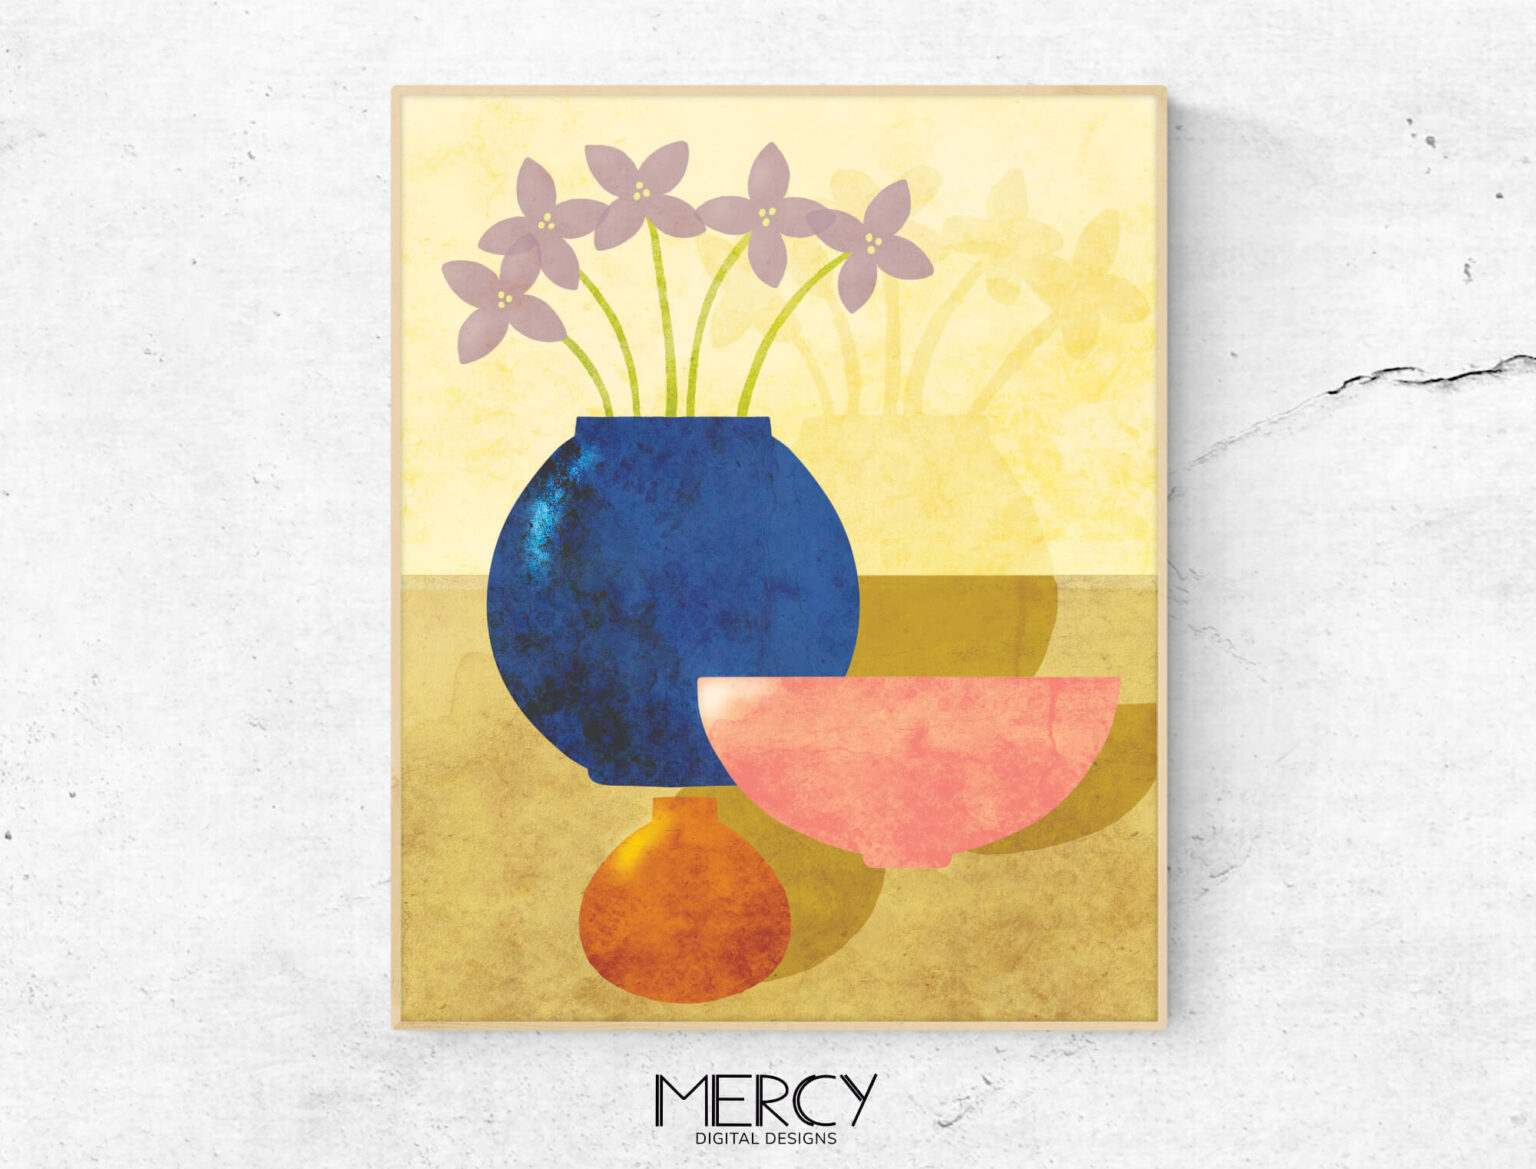 printable-stationery-borders-paper-colorful-waves-mercy-digital-designs